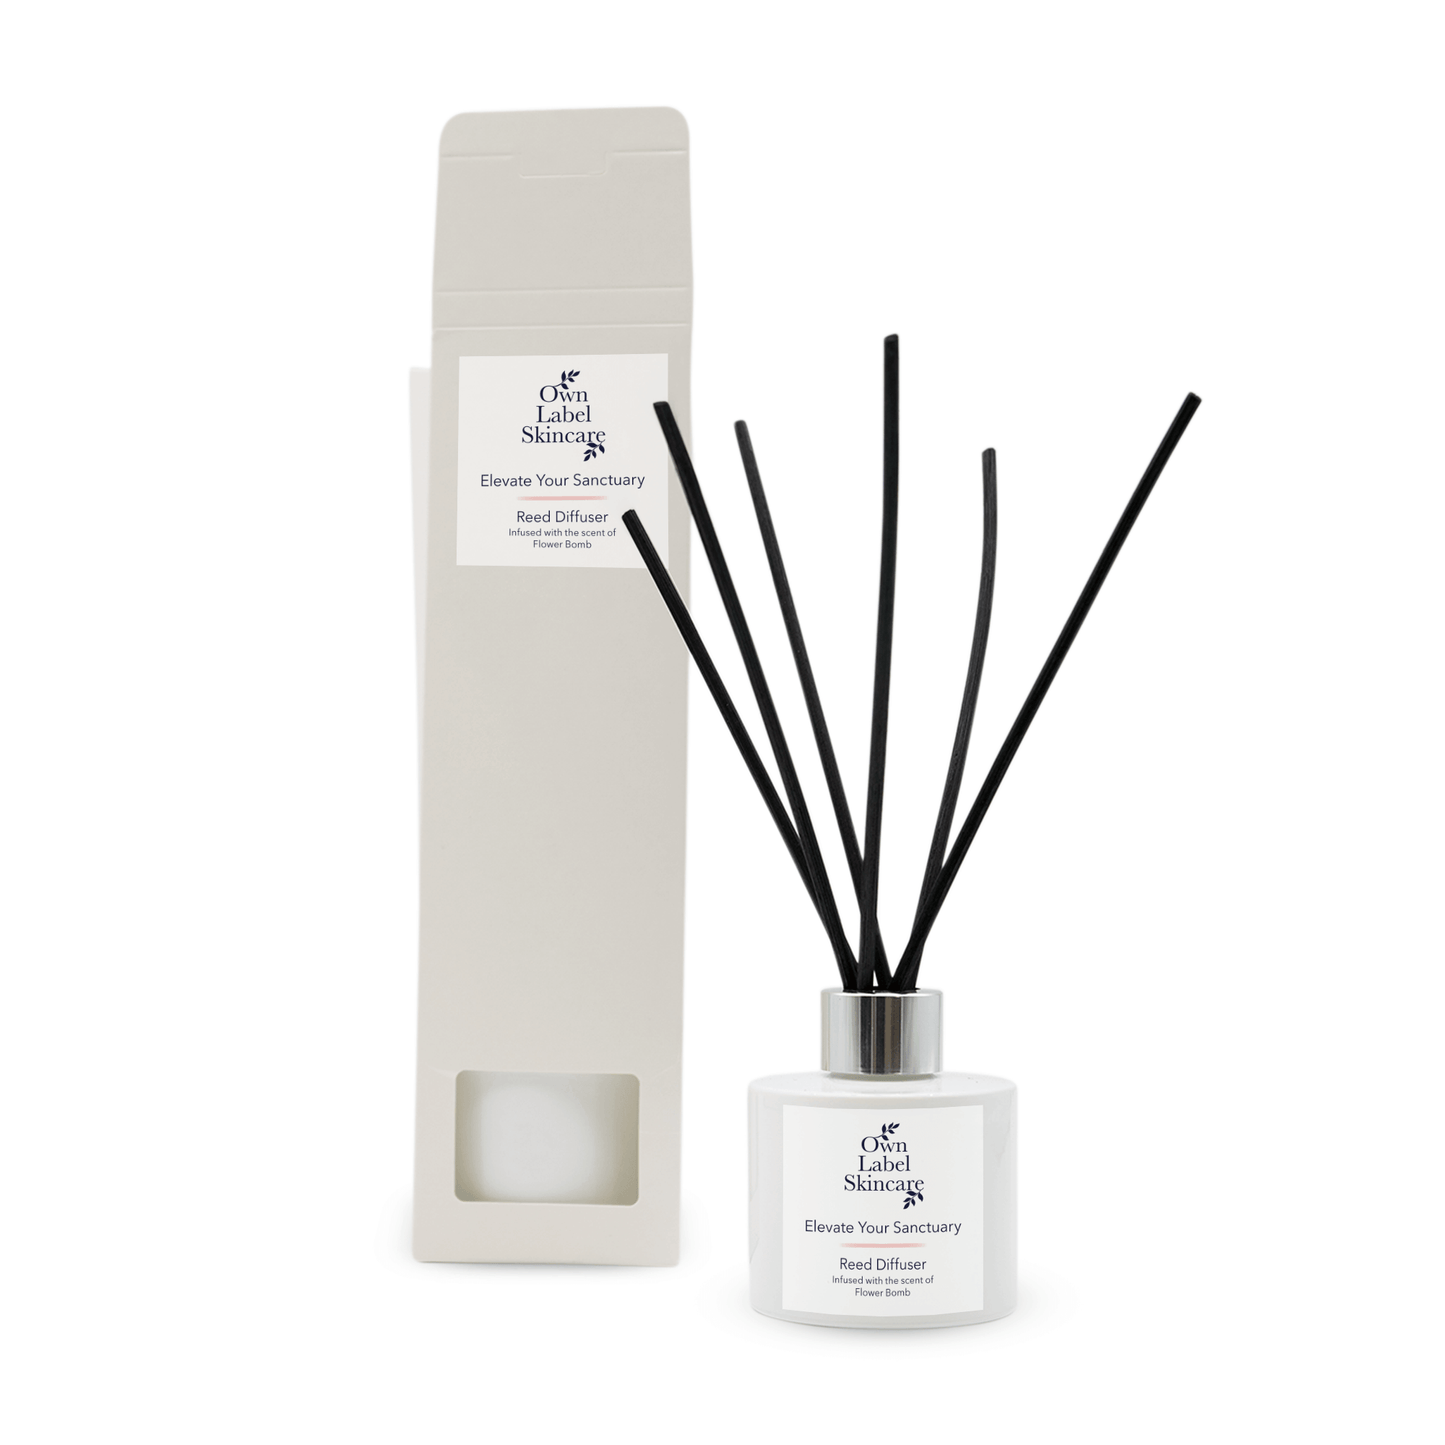 It's The Bomb Reed Diffuser Own Brand